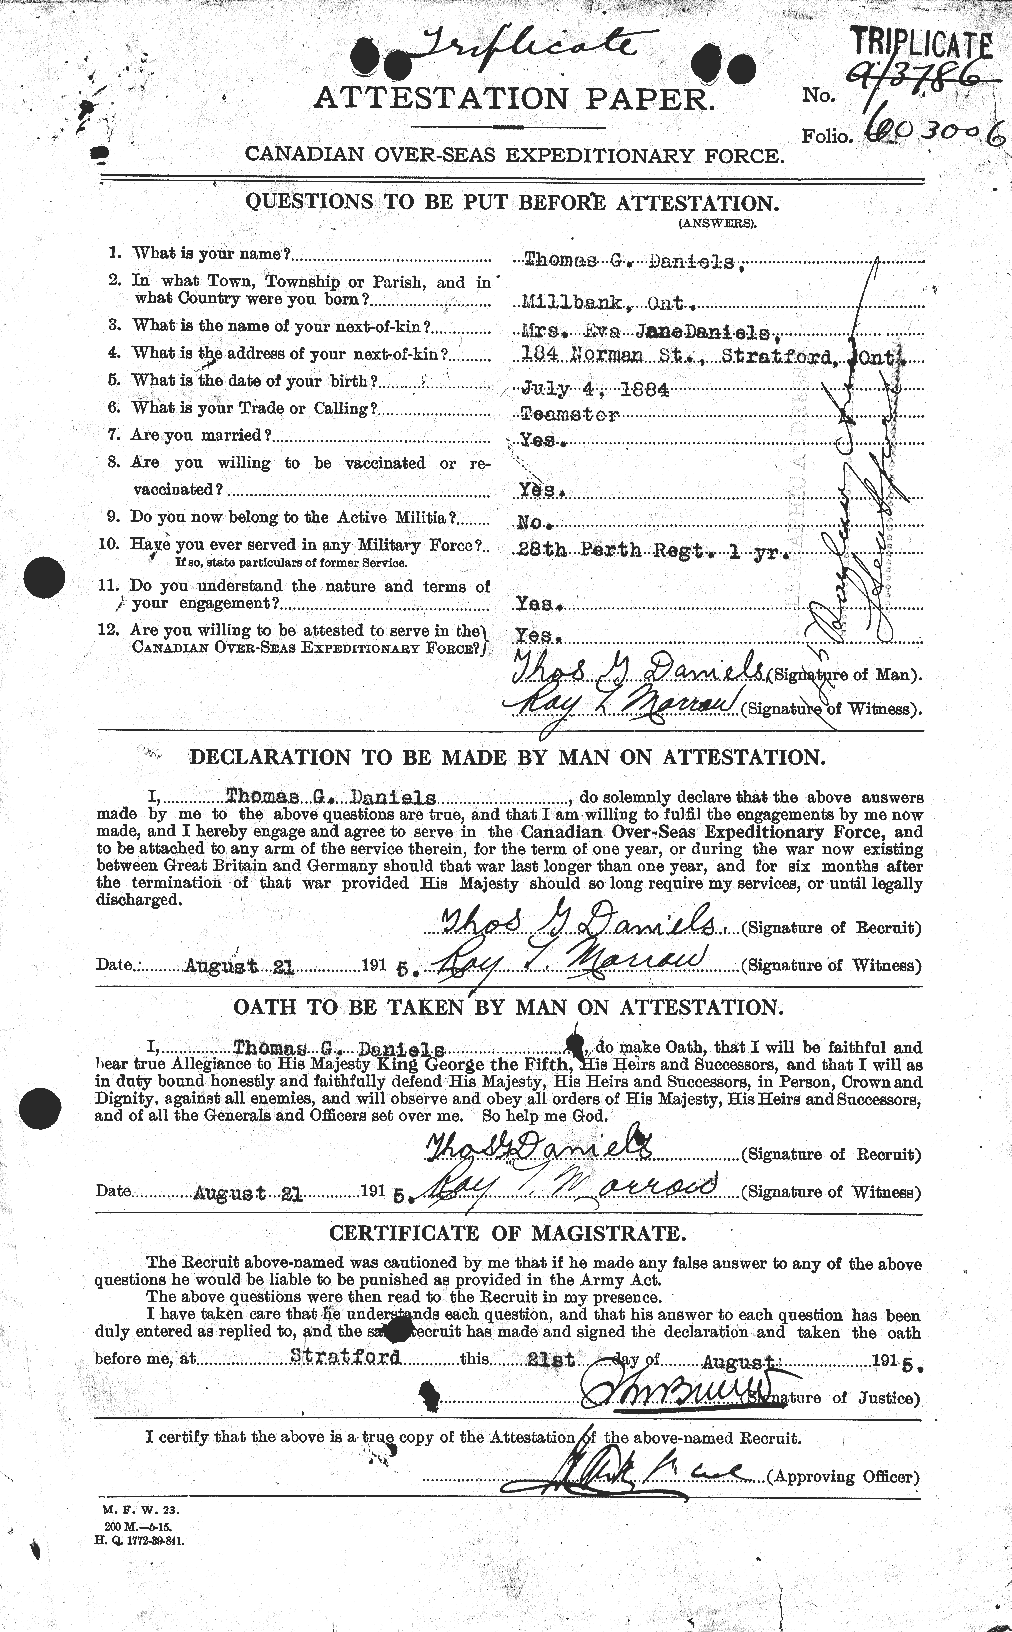 Personnel Records of the First World War - CEF 279677a